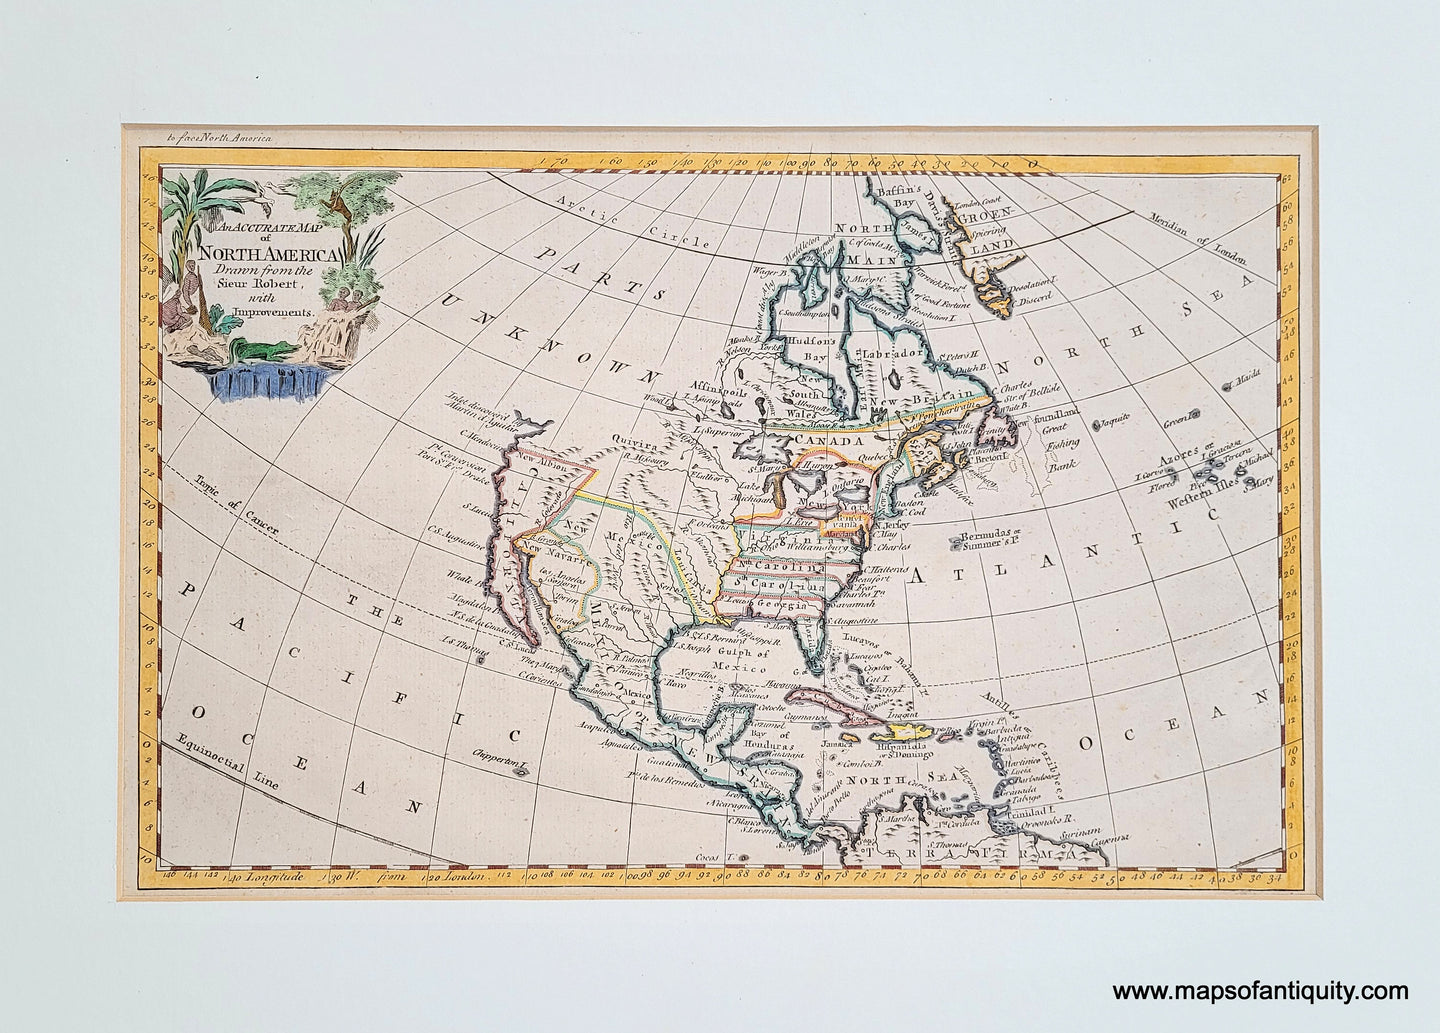 Genuine-Antique-Map-An-Accurate-Map-of-North-America-Drawn-from-the-Sieur-Robert-with-Improvements-1762-Rollos-after-Vaugondy-British-Colonies-united-states-Maps-Of-Antiquity